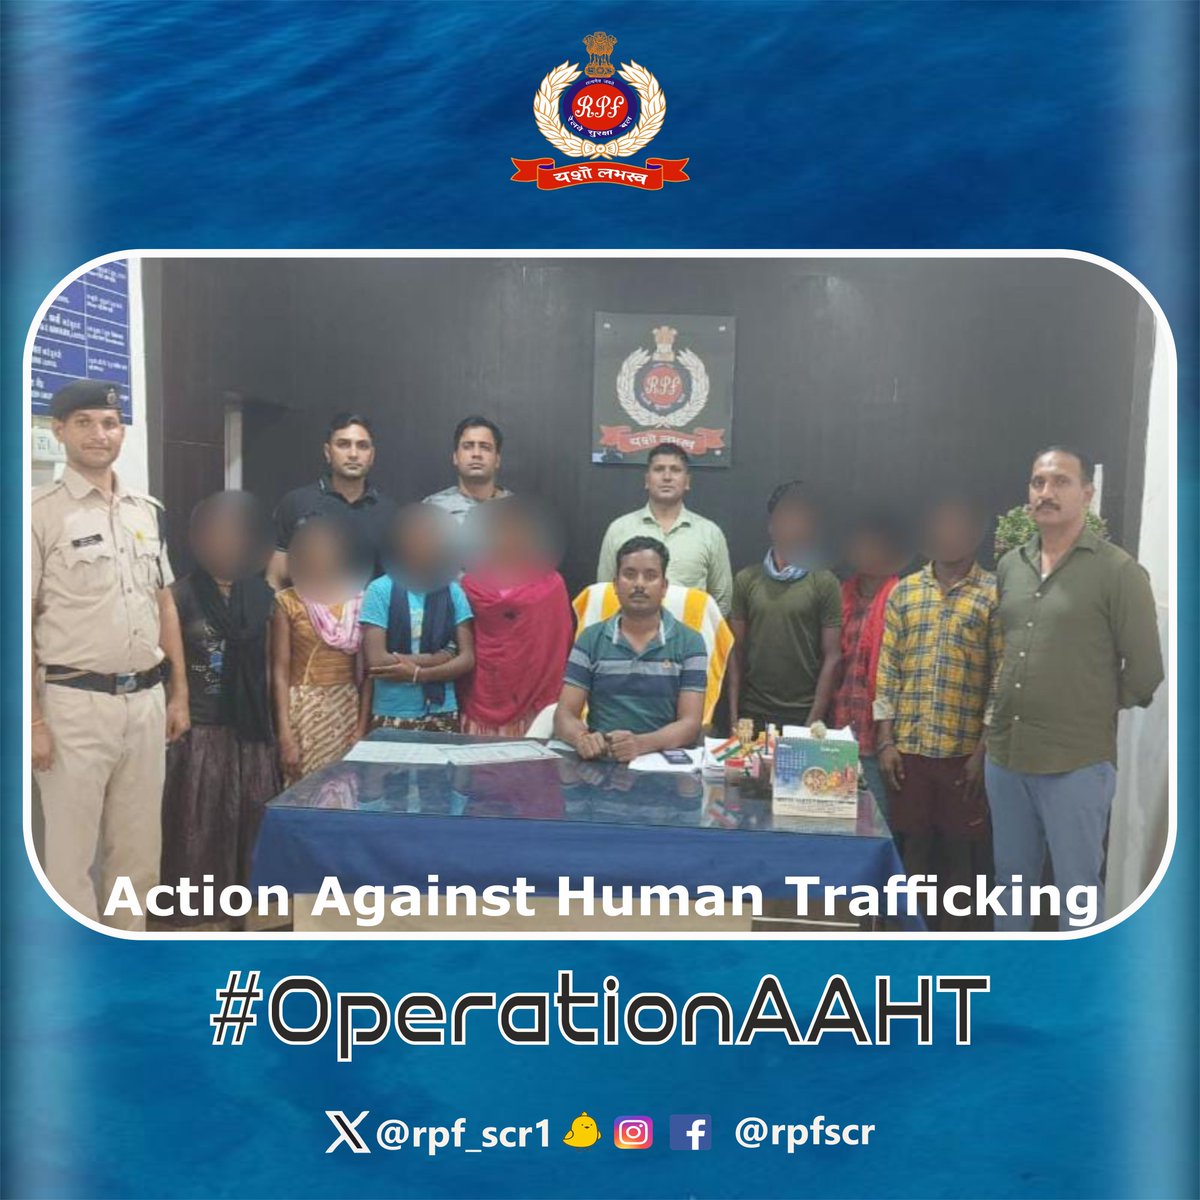 #RPF #Ramagundam joins forces with @BBAIndia, rescuing 07 children from the grips of #labourExploitation, ensuring a promising future for each one of them.
A victory for child rights & defeat against the exploitation. #HumanTrafficking. #OperationAAHT.
@RPF_INDIA @rpfscr_sc